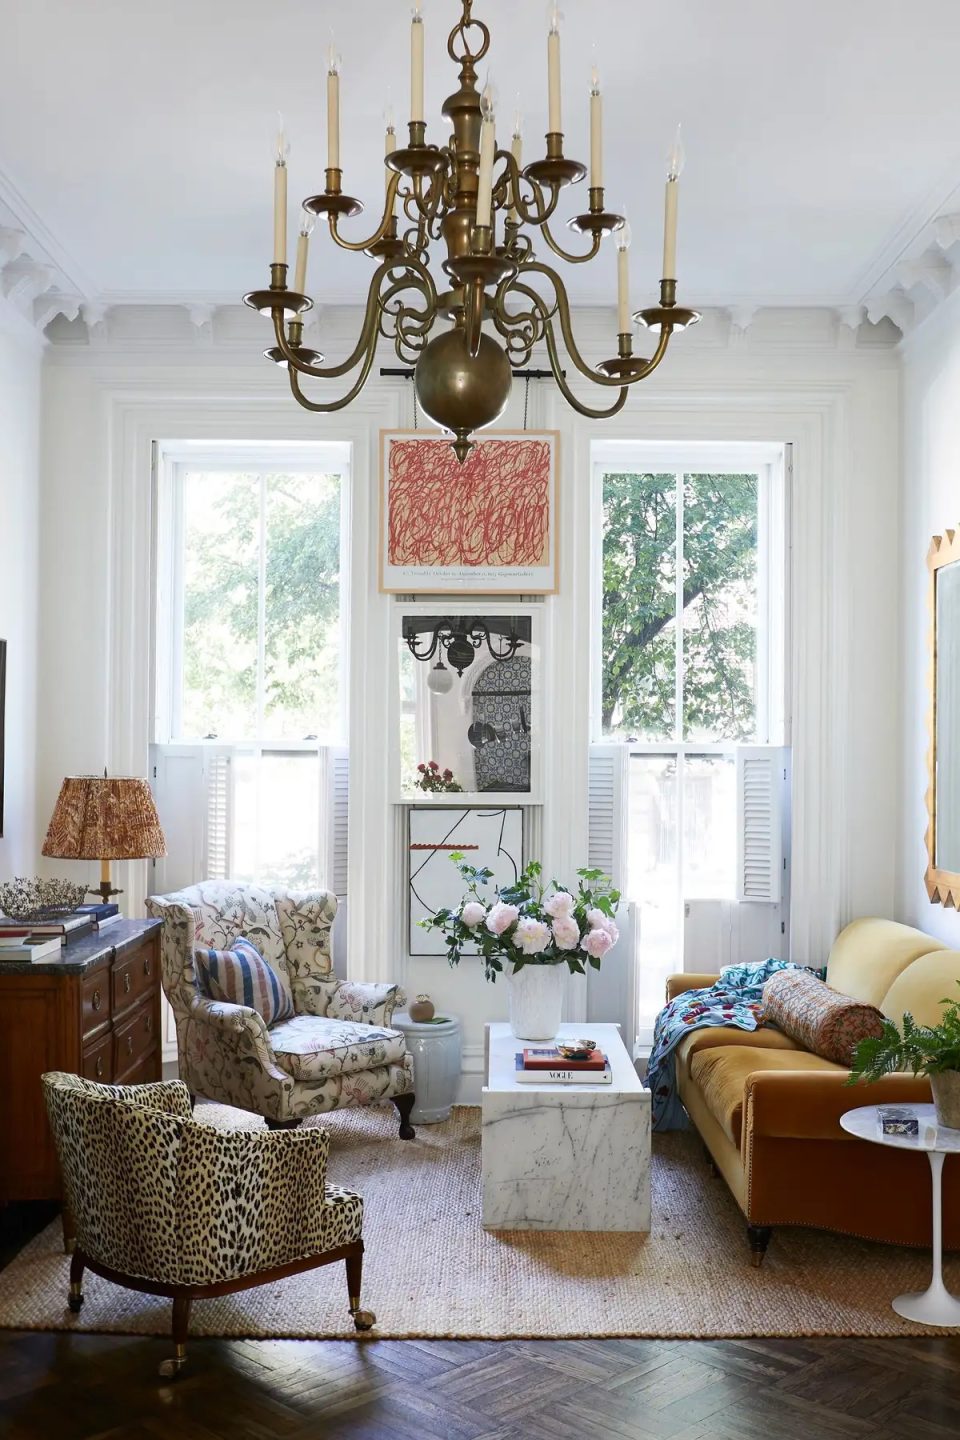 This Brooklynite Creates Rooms with a Delightful Mix of English, Moorish and Scandi Style